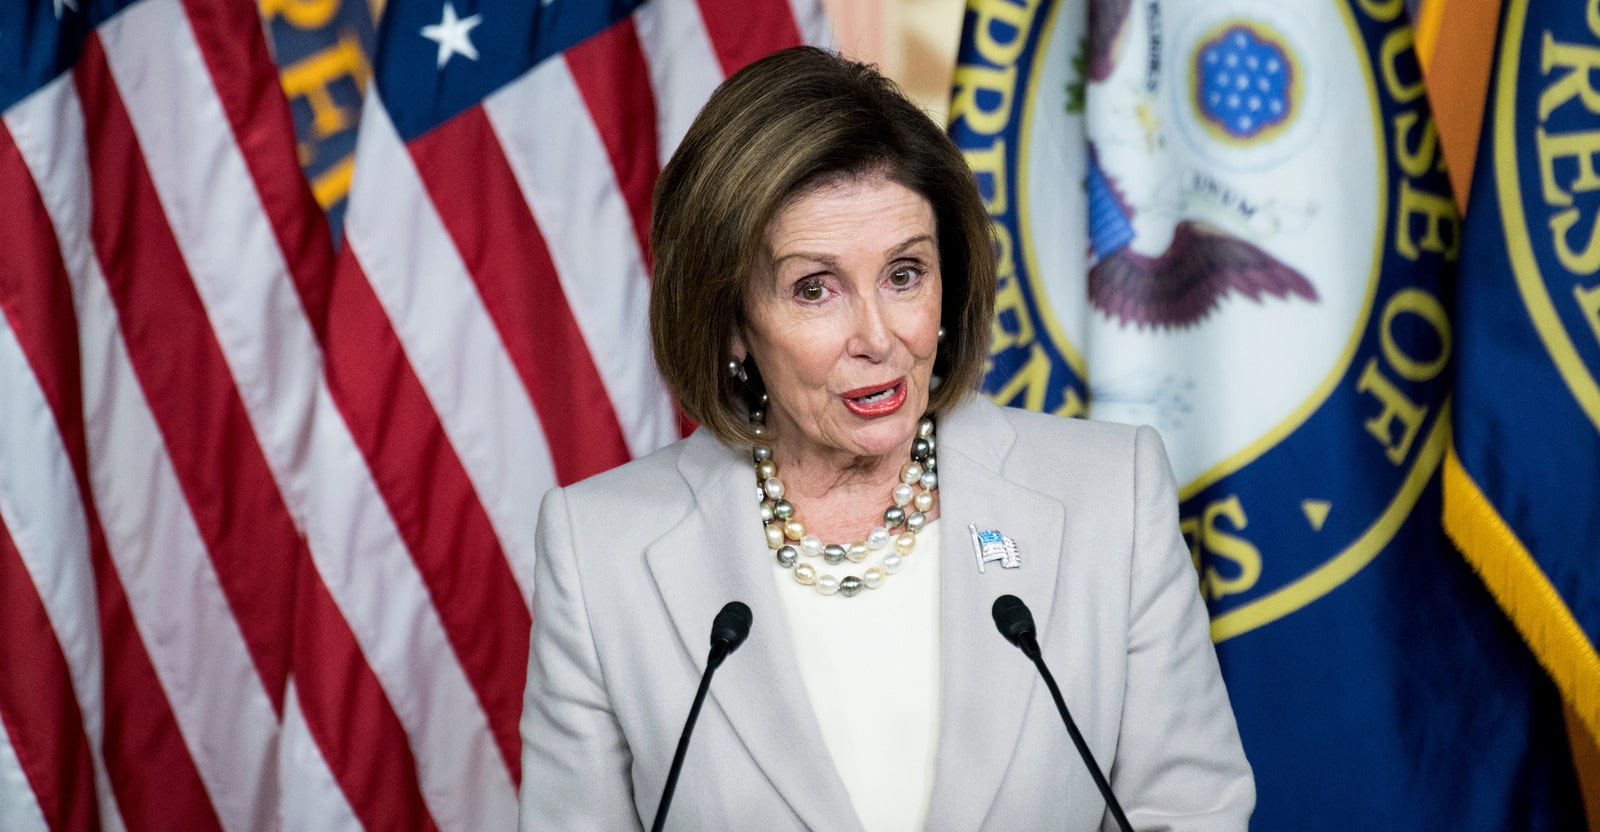 Angry Liberals React After Nancy Pelosi Ejected From Plush Congressional Office – Trump News Today